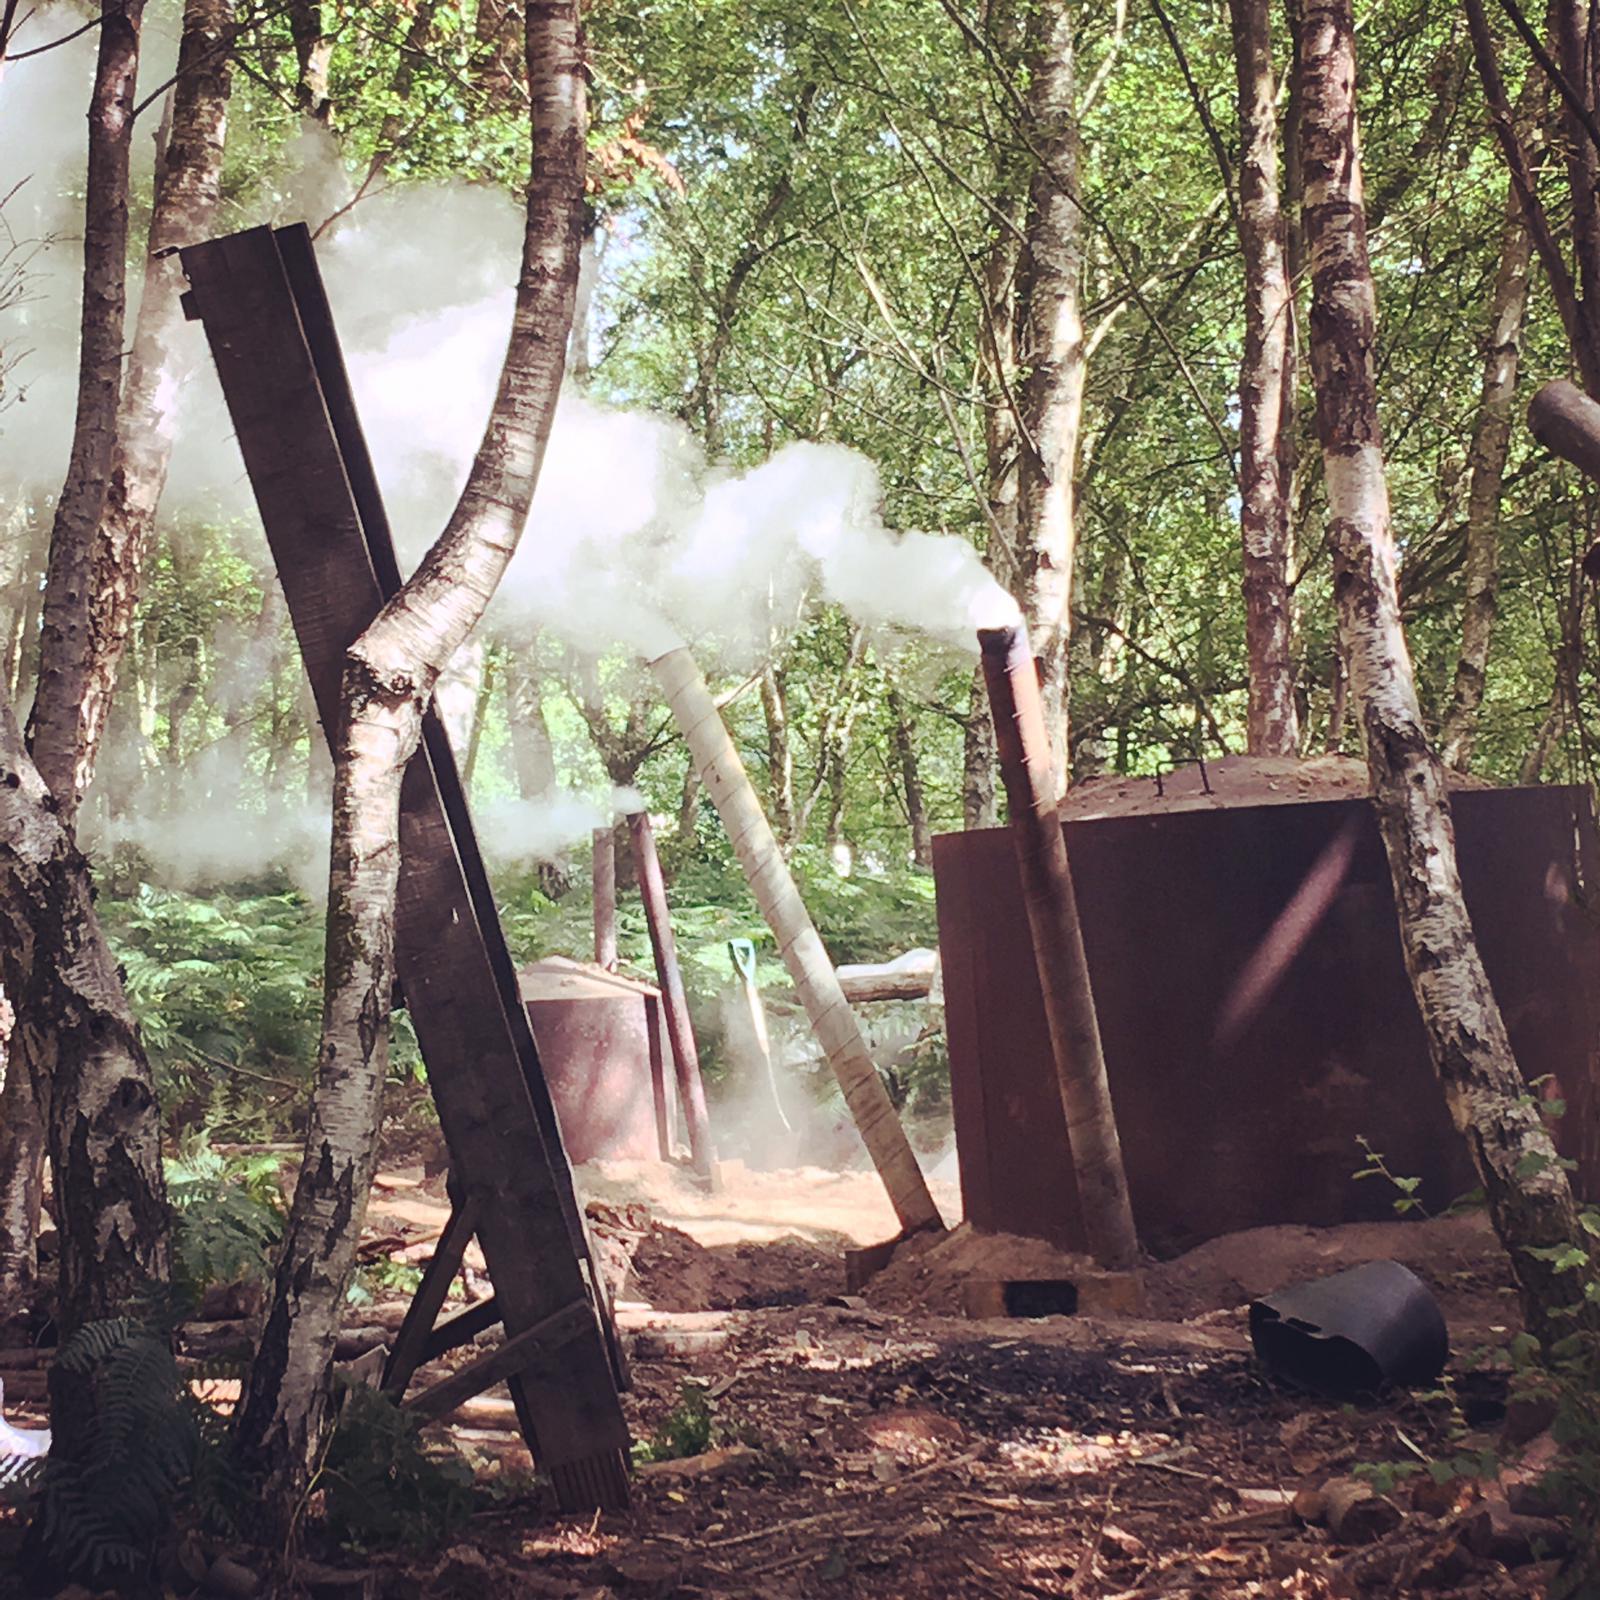 Charcoal making incinerator smoking in an area of Sussex Chestnut Coppice woodland